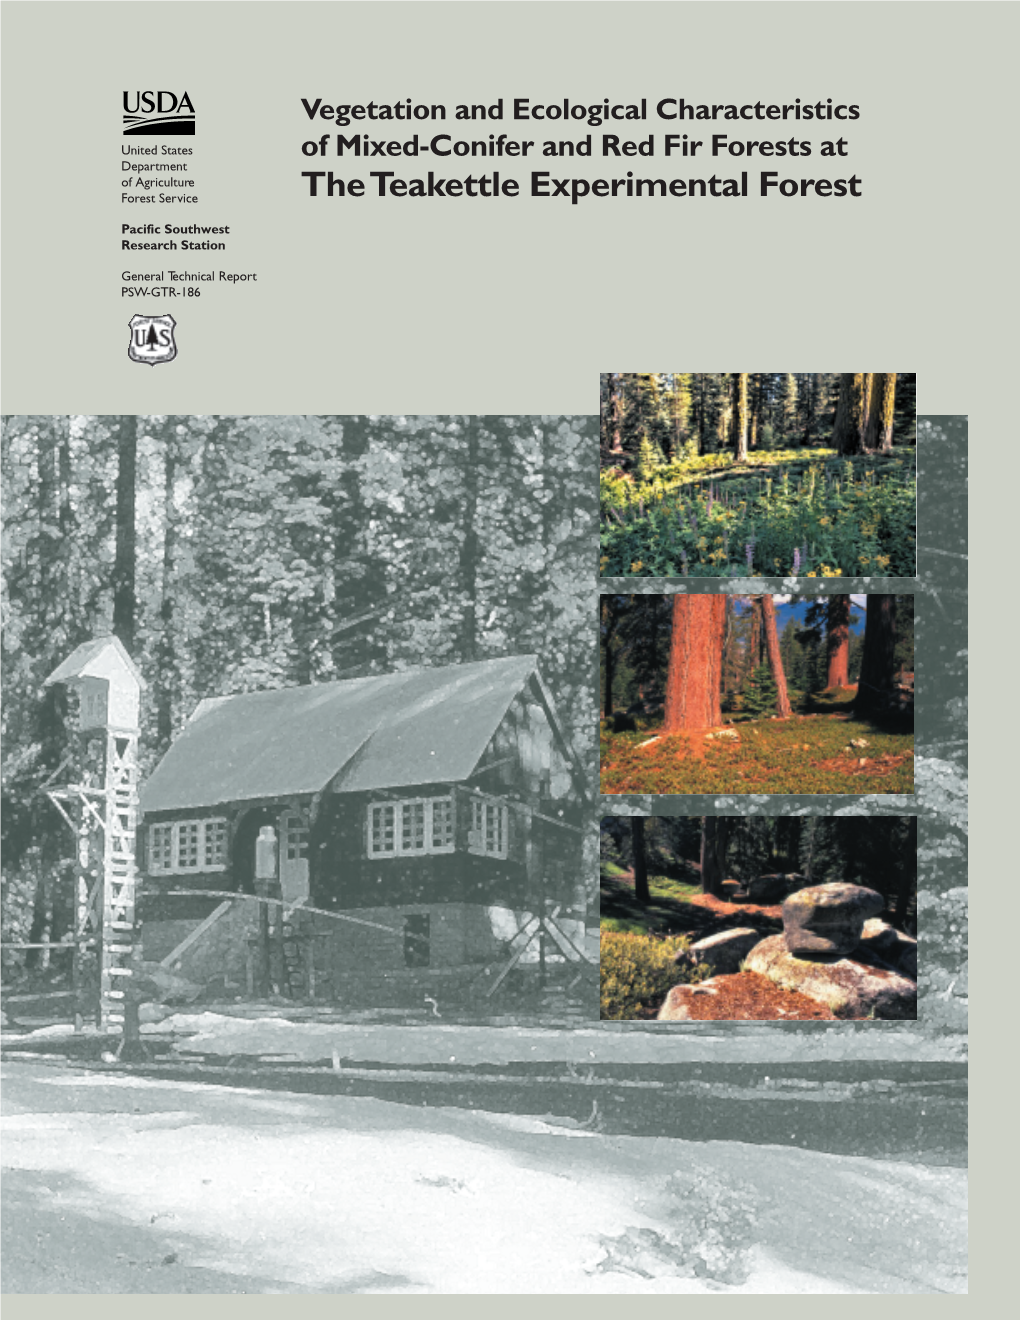 Vegetation and Ecological Characteristics of Mixed-Conifer and Red Fir Forests at the Teakettle Experimental Forest